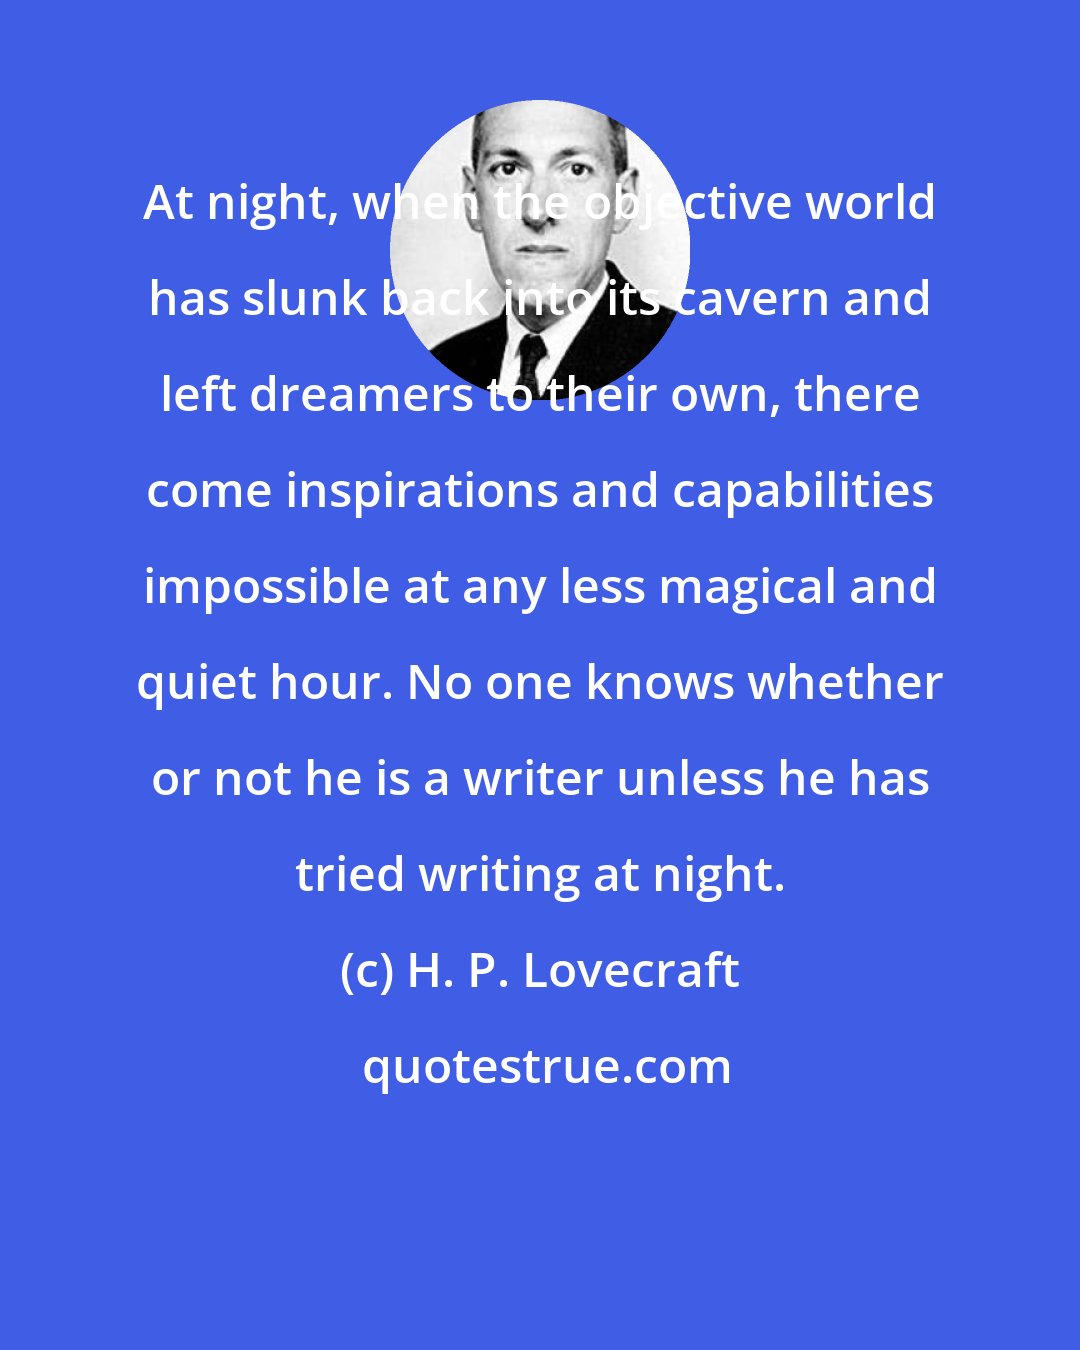 H. P. Lovecraft: At night, when the objective world has slunk back into its cavern and left dreamers to their own, there come inspirations and capabilities impossible at any less magical and quiet hour. No one knows whether or not he is a writer unless he has tried writing at night.